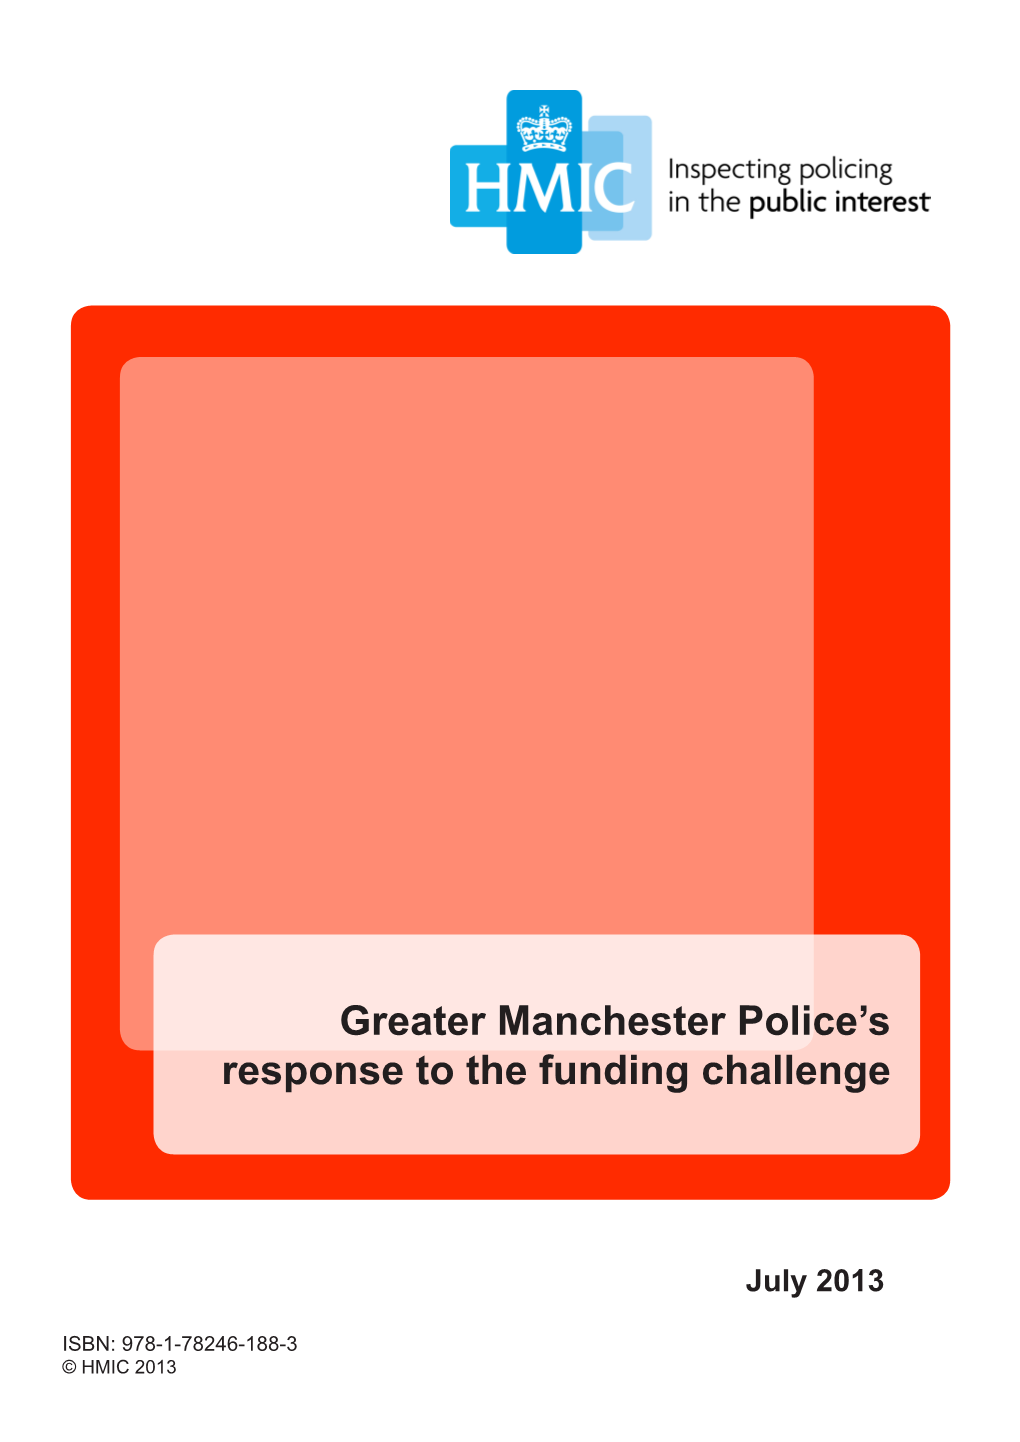 Greater Manchester Police's Response to the Funding Challenge